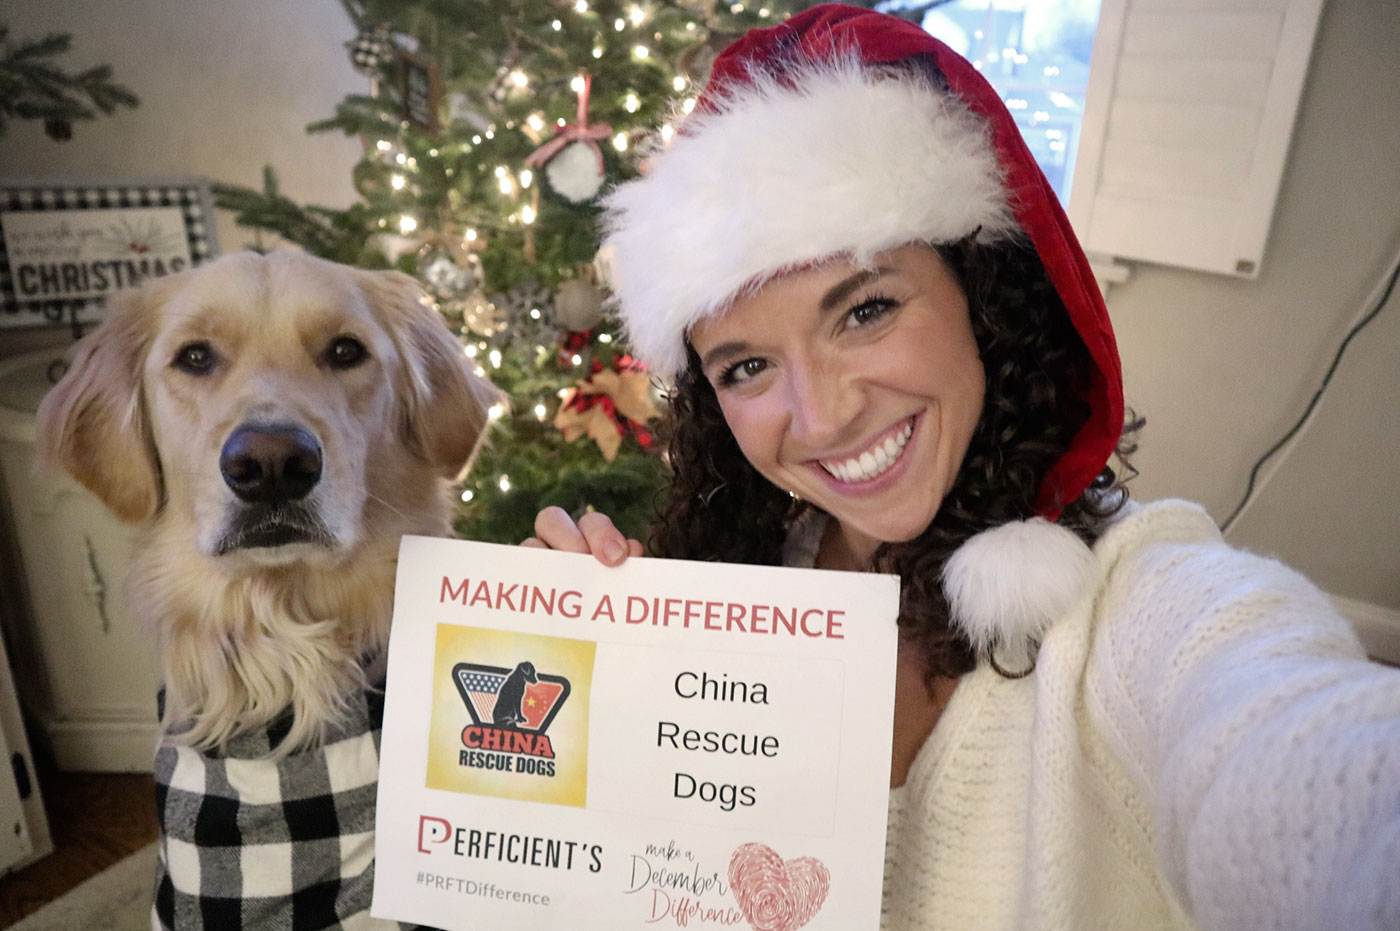 Colleague with her golden retriever dog holding a MADD sign for China Rescue Dogs.